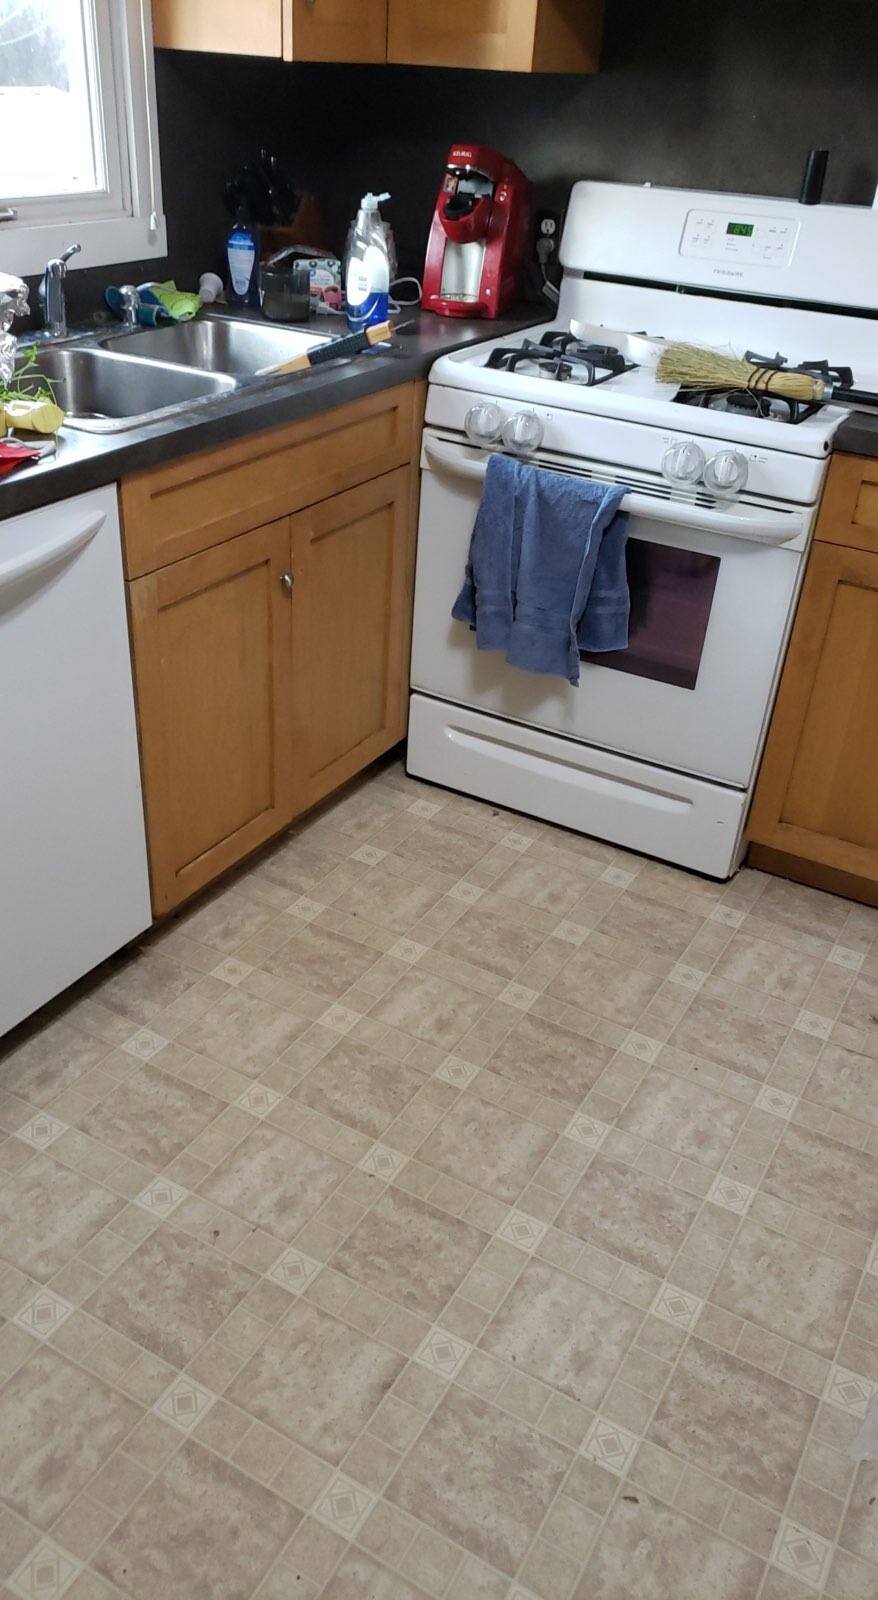 An Outdated Kitchen Floor, Are Tile Kitchen Floors Outdated